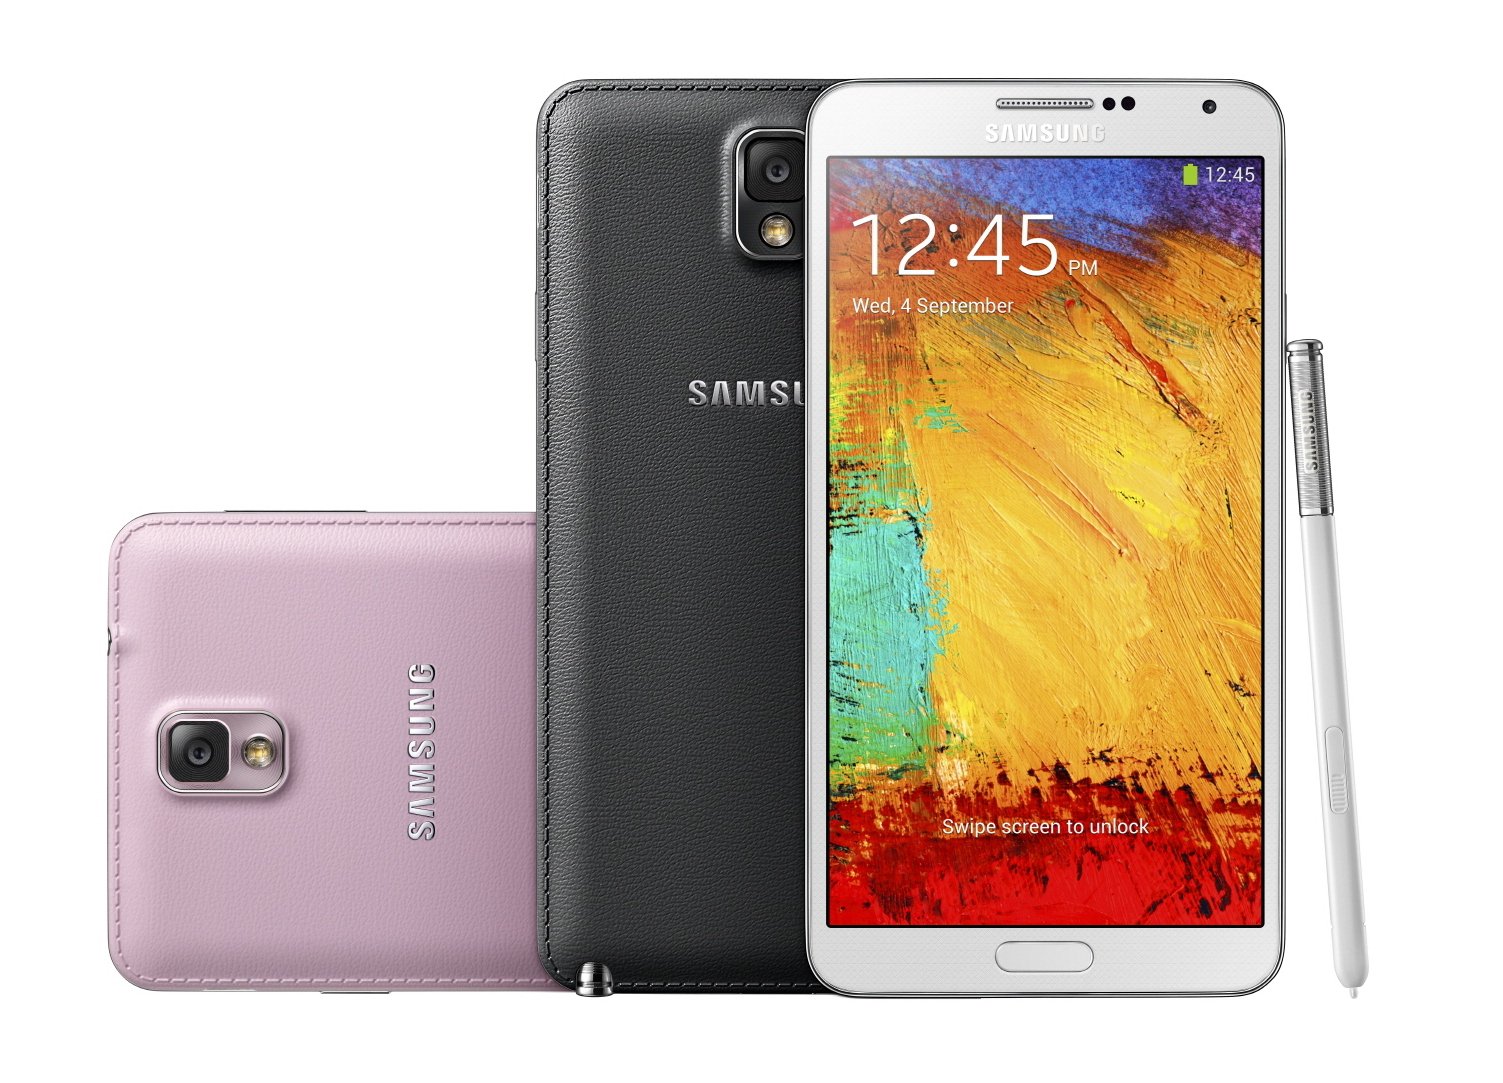 Check out the best new Galaxy Note 3 features.